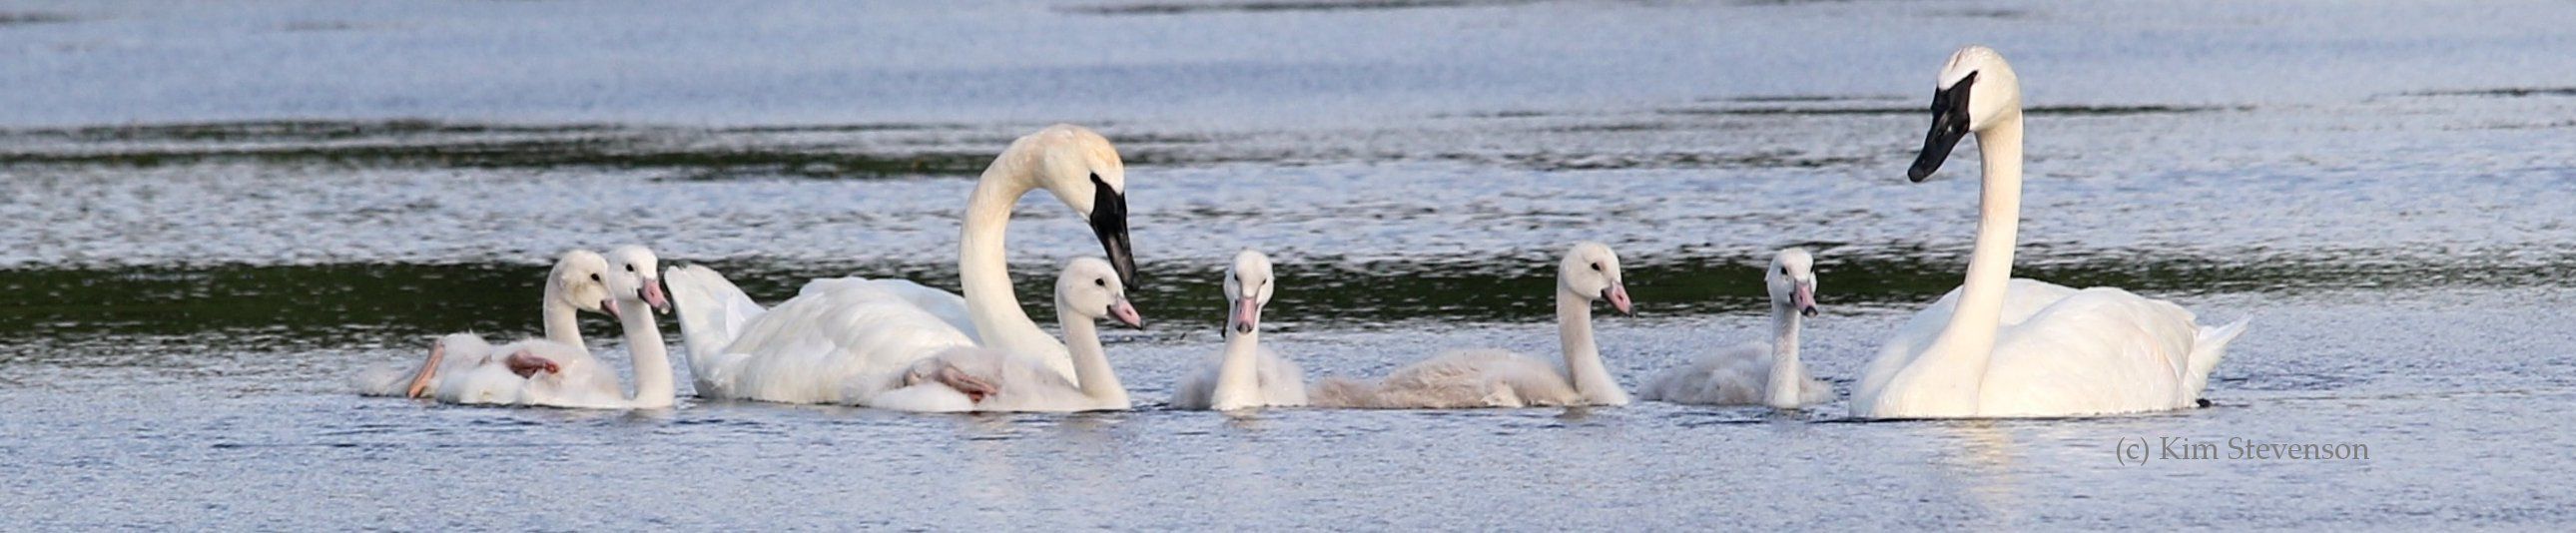 Your gift in your will ensures the future of swan conservation across North America